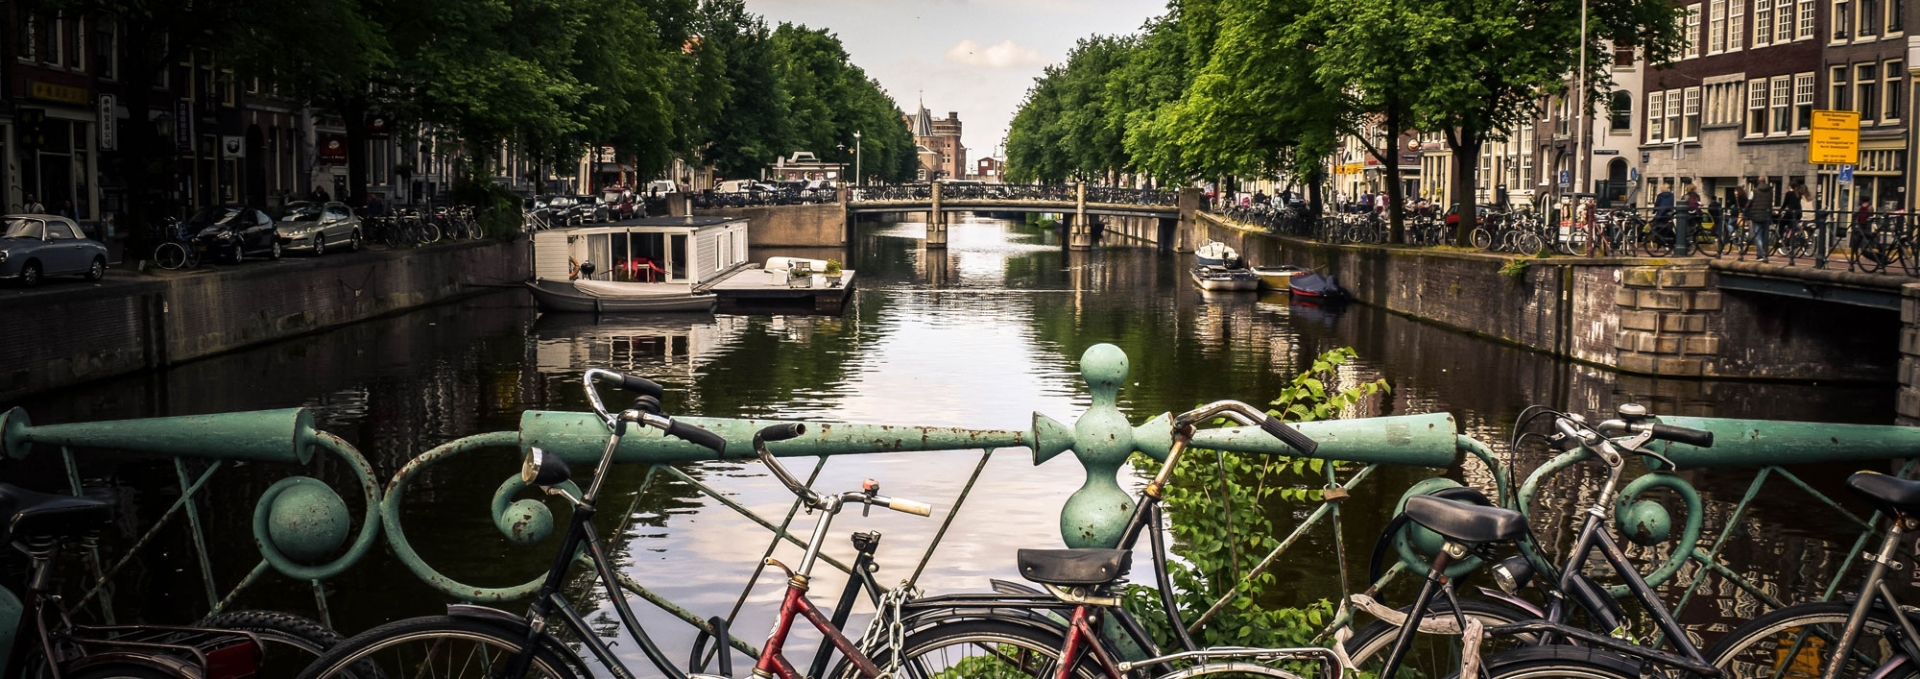 Jobs in the Netherlands – Living and Working